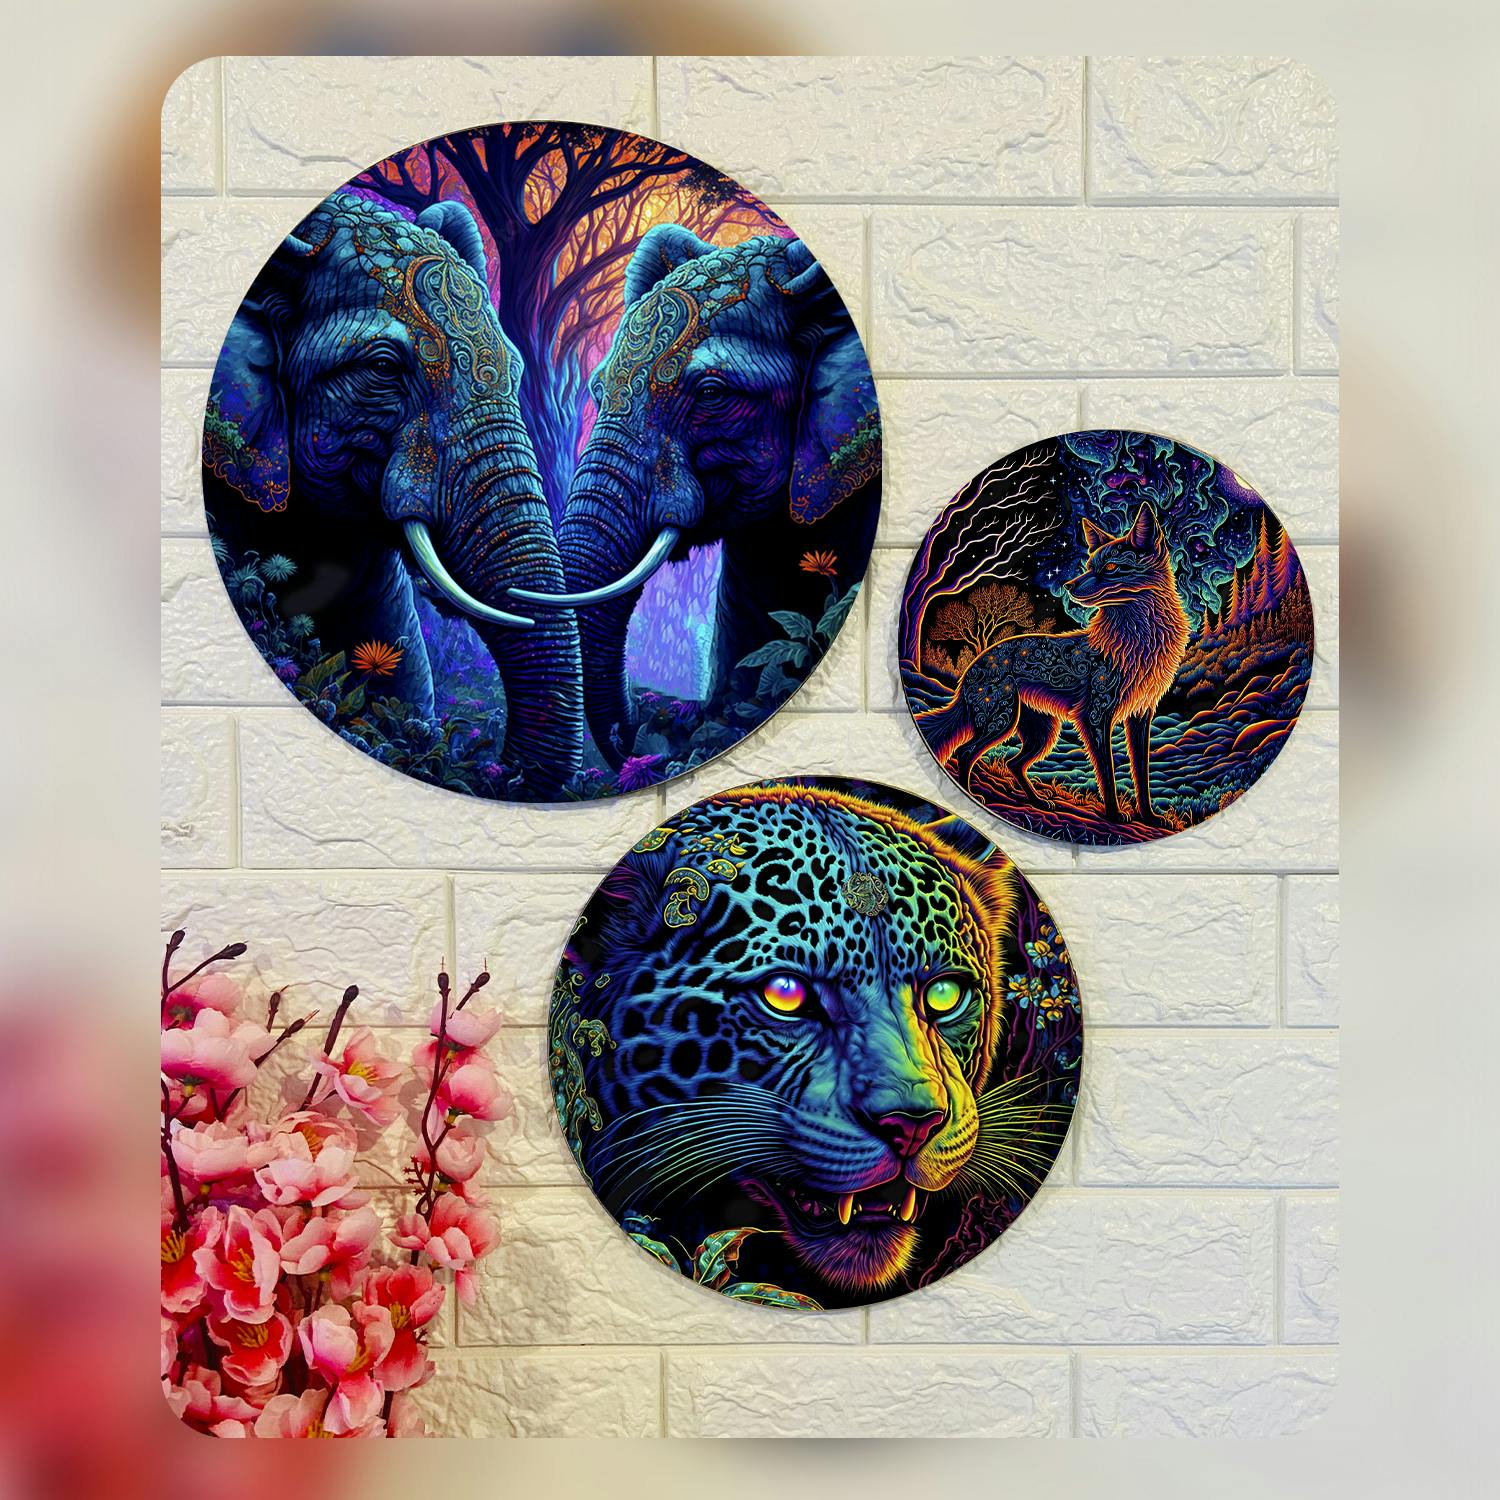 Wooden Plate with Elephant, Tiger, and Fox Design